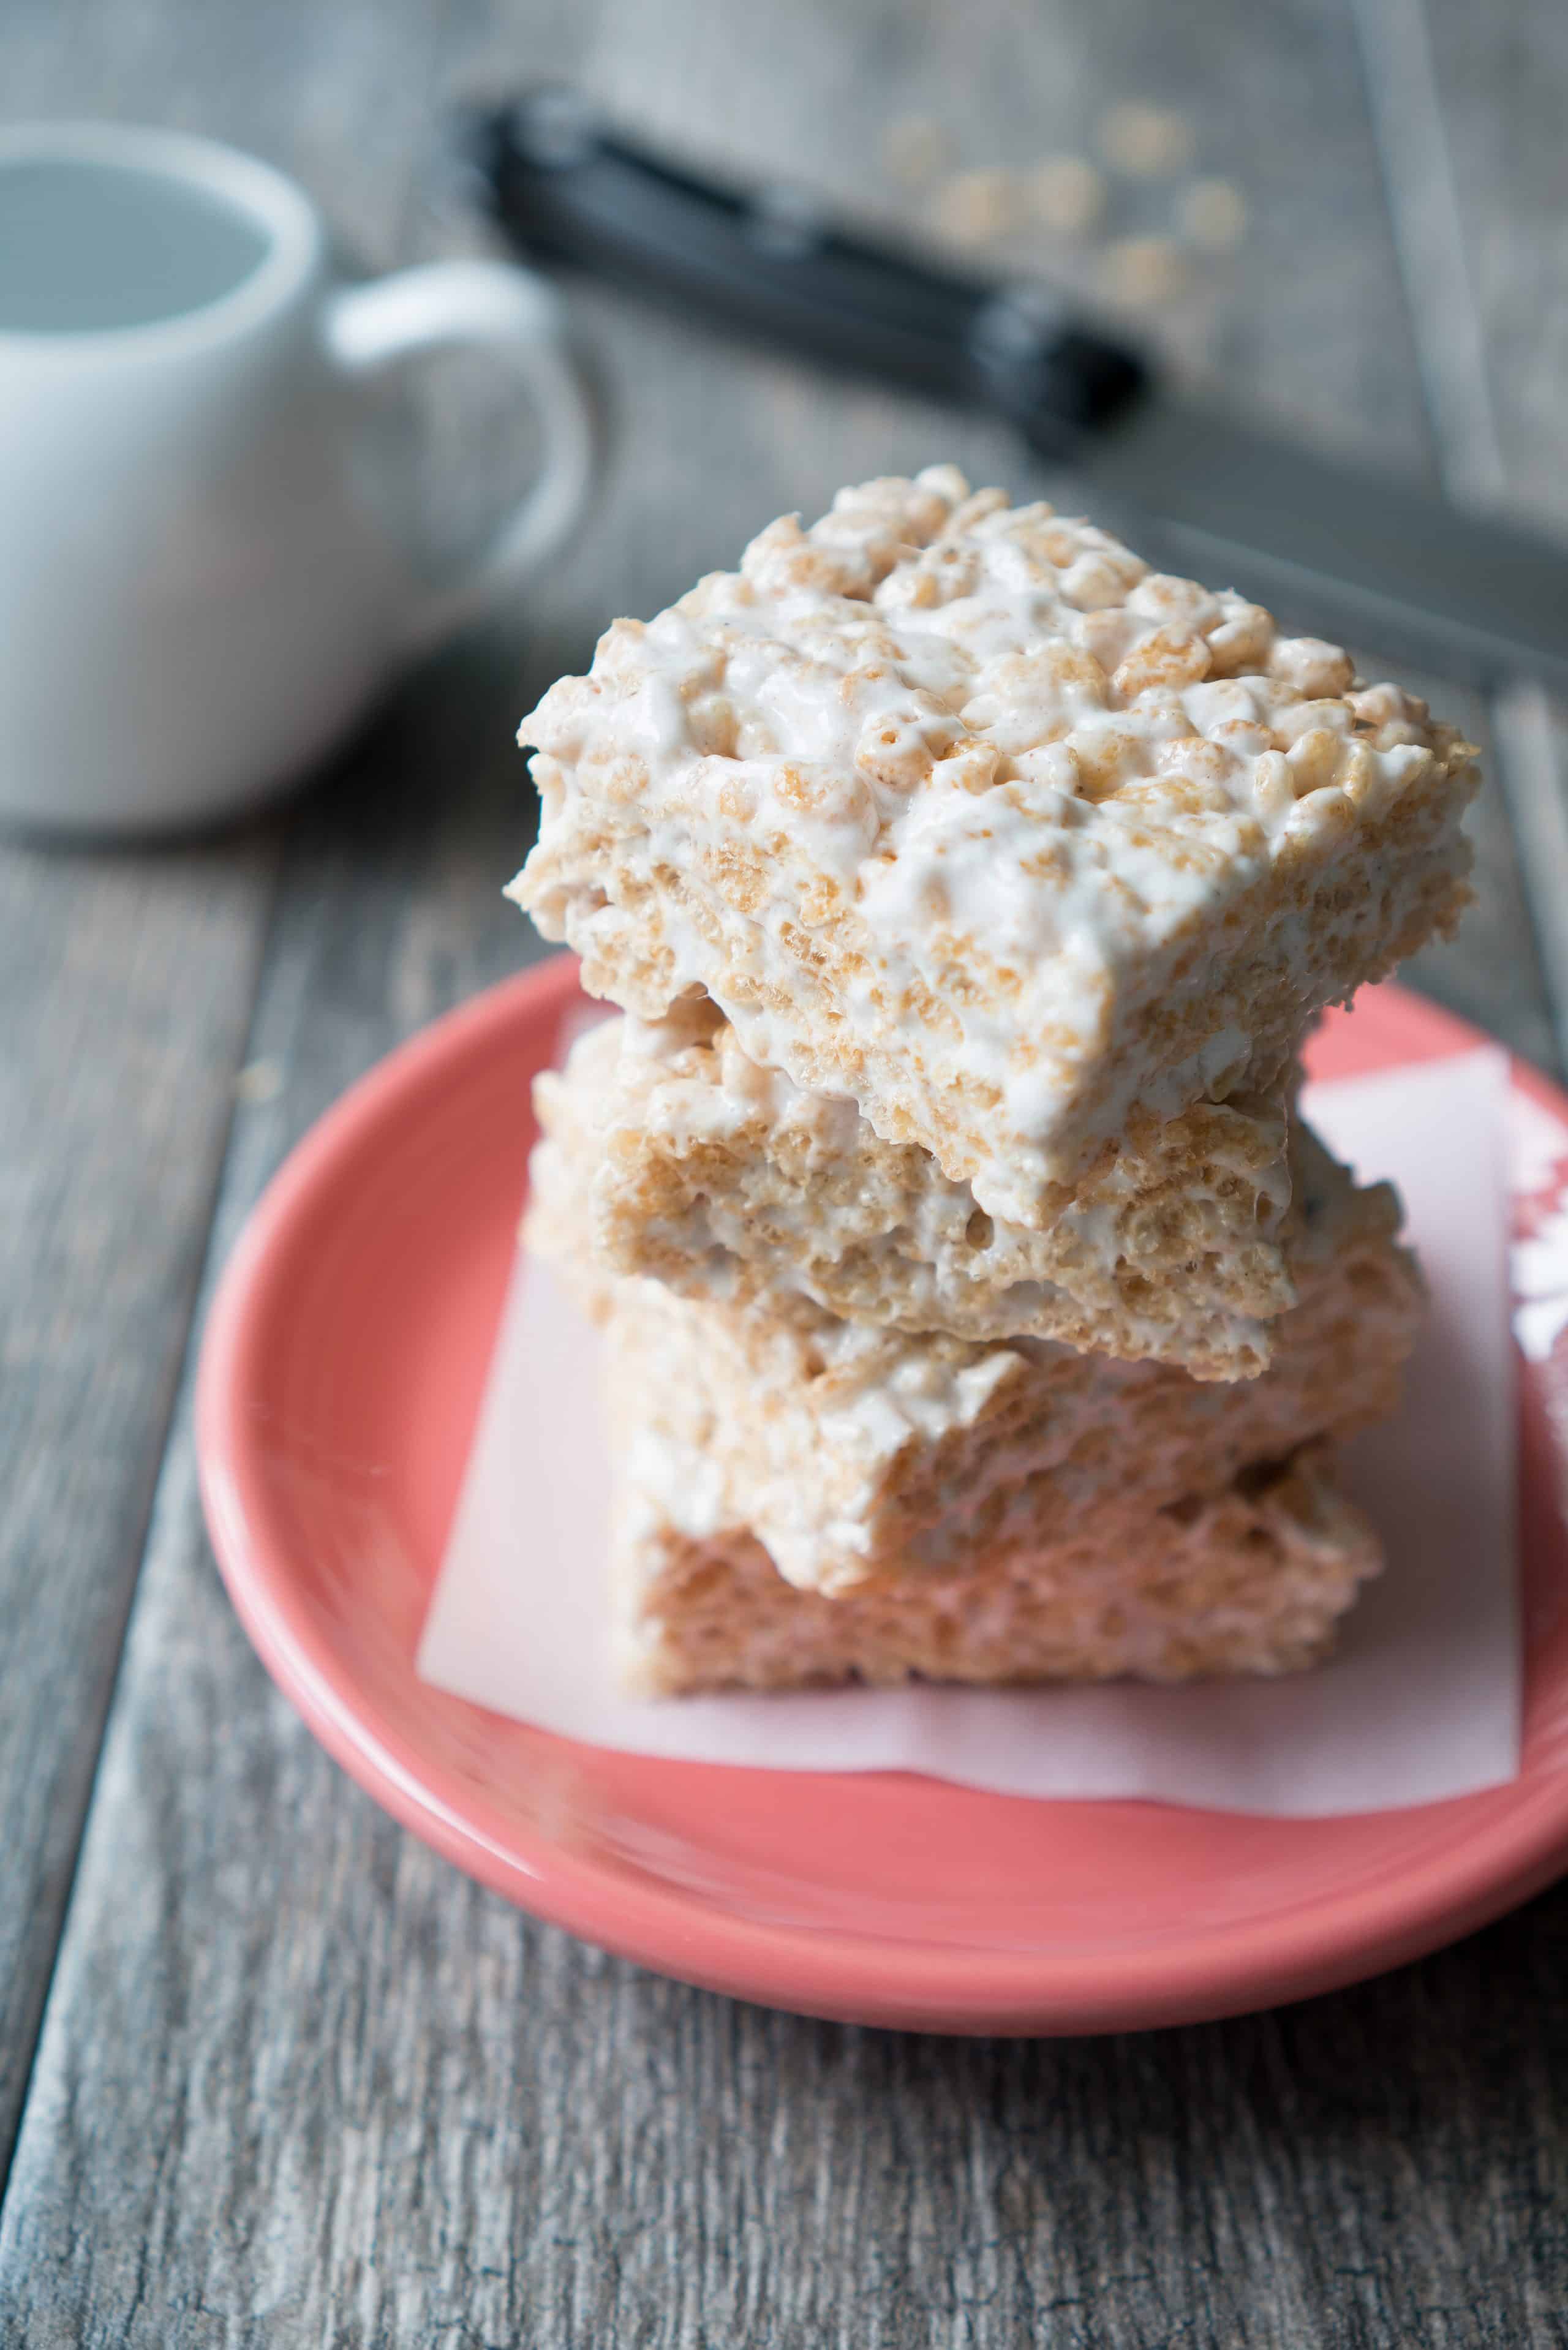 Cardamom Rice Krispie Treats – Simple recipe for Cardamom Rice Krispie Treats, gluten-free & vegan friendly. You’d never know that these use coconut oil instead of butter & brown rice cereal. A twist on the classic gooey marshmallow square with vanilla, cardamom, cinnamon, and salt! ♥ | freeyourfork.com